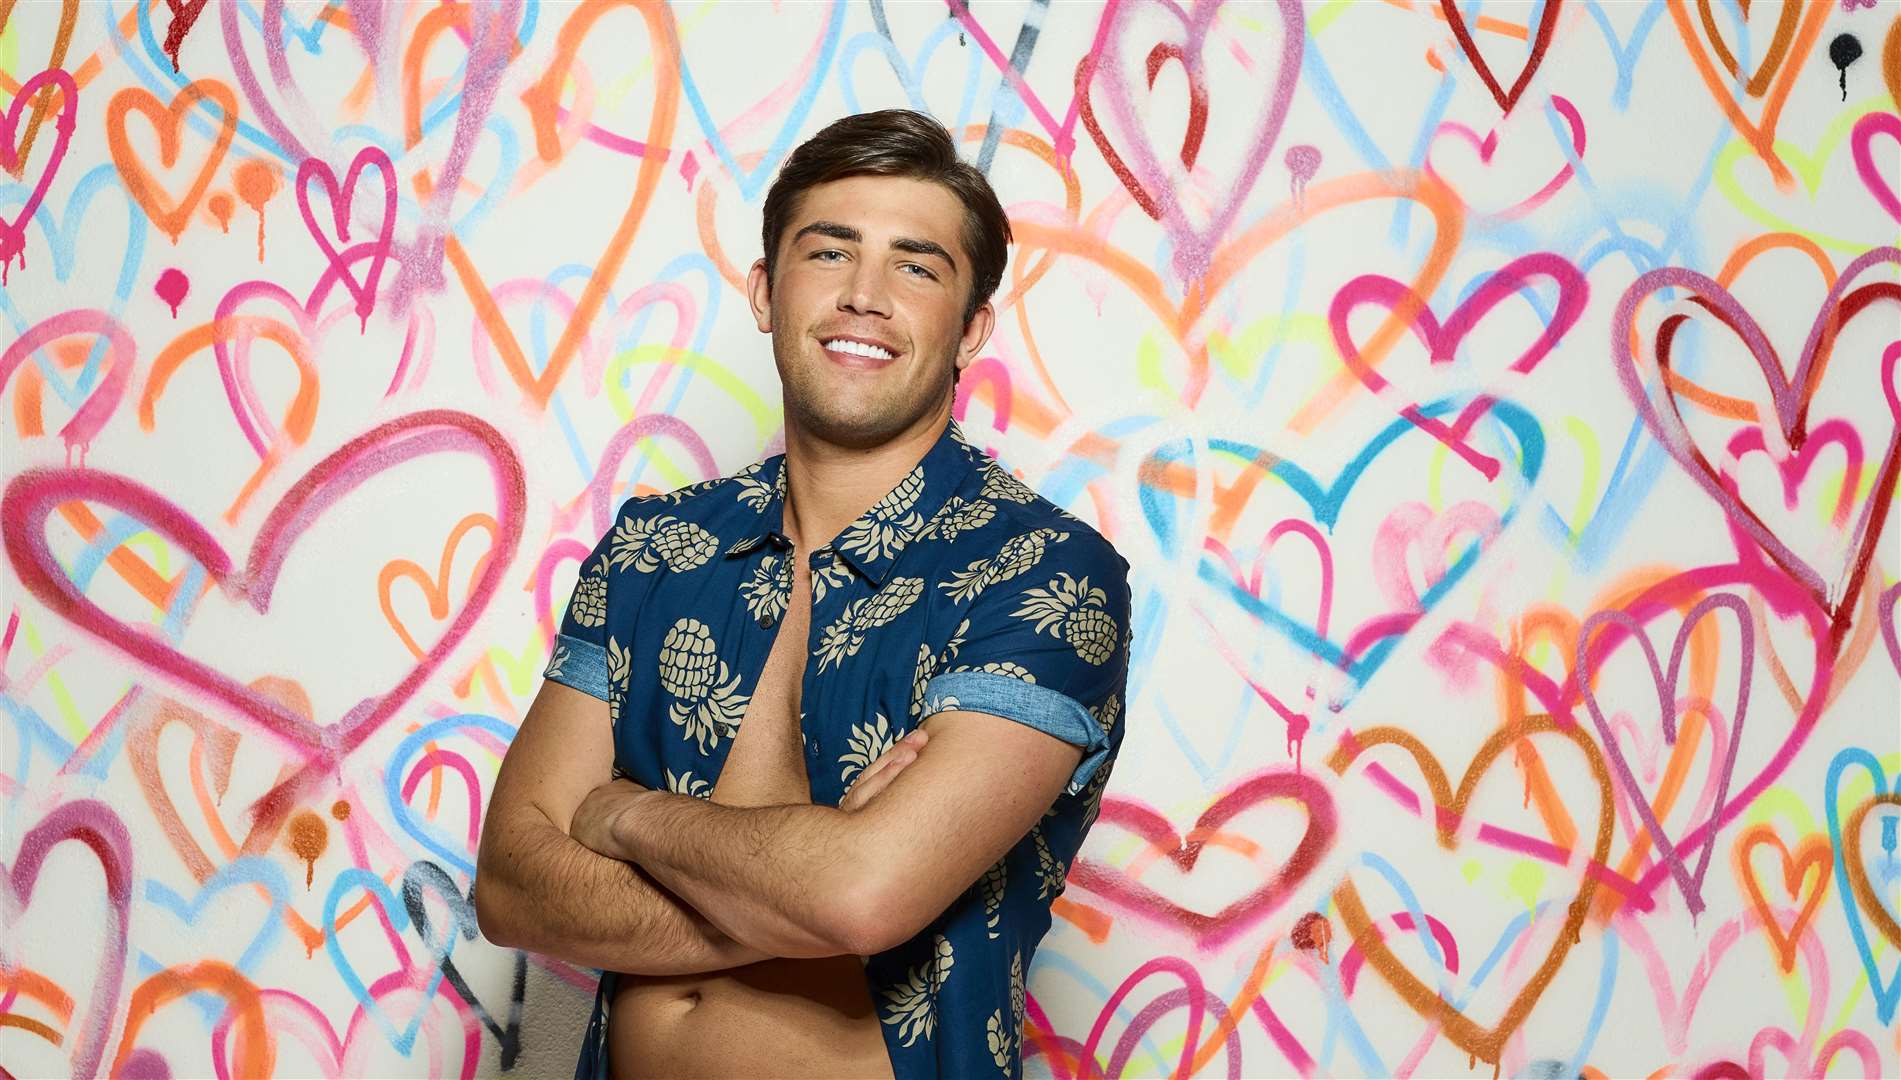 Jack Fincham took the Love Island crown on Monday night with Dani Dyer